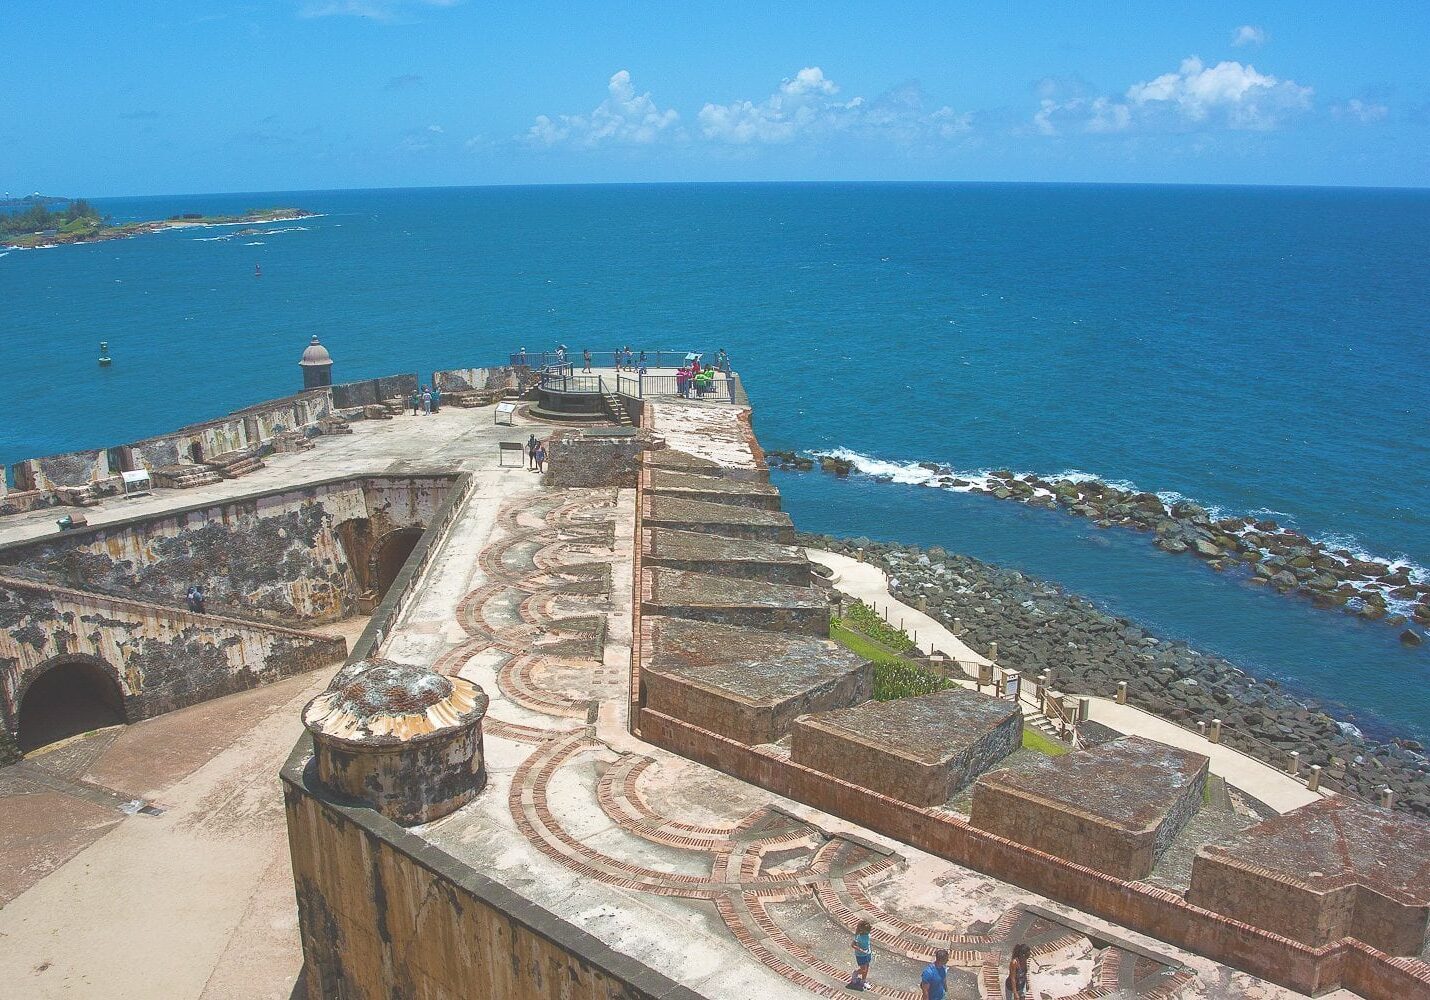 North and Ocean Facing side of El Morro Fort. My great-great-grandfather was held as a political prisoner here 1887. He was fighting for the same colonial issues we have now in 2016. I only hope my daughter gets to experience the Independence of my Island.